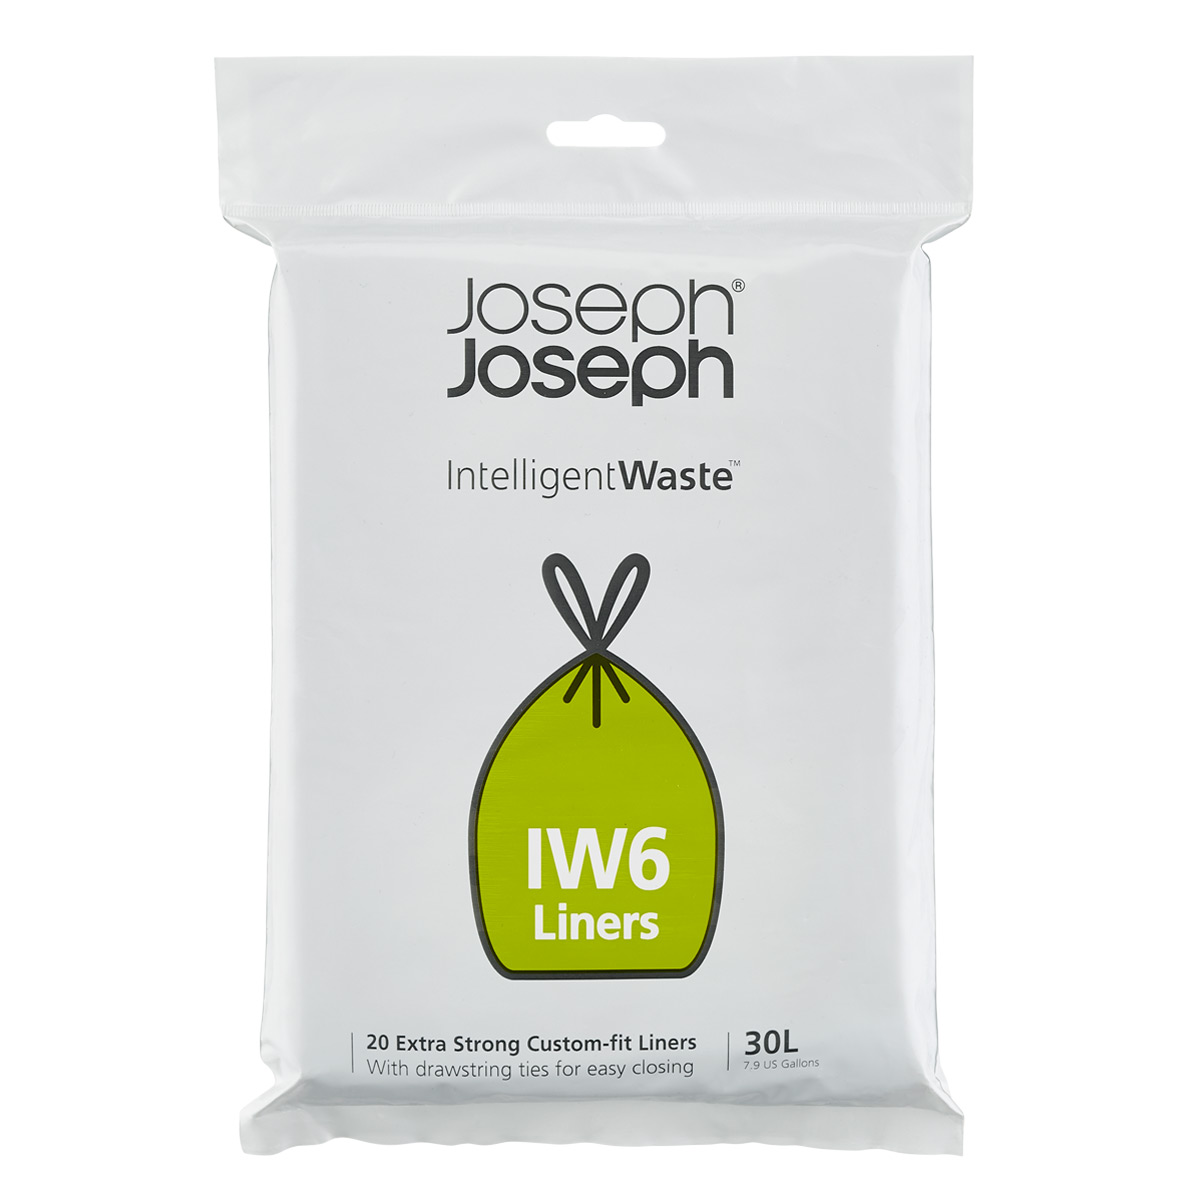 IW6 Extra Strong 20 Trash Bags - 30L